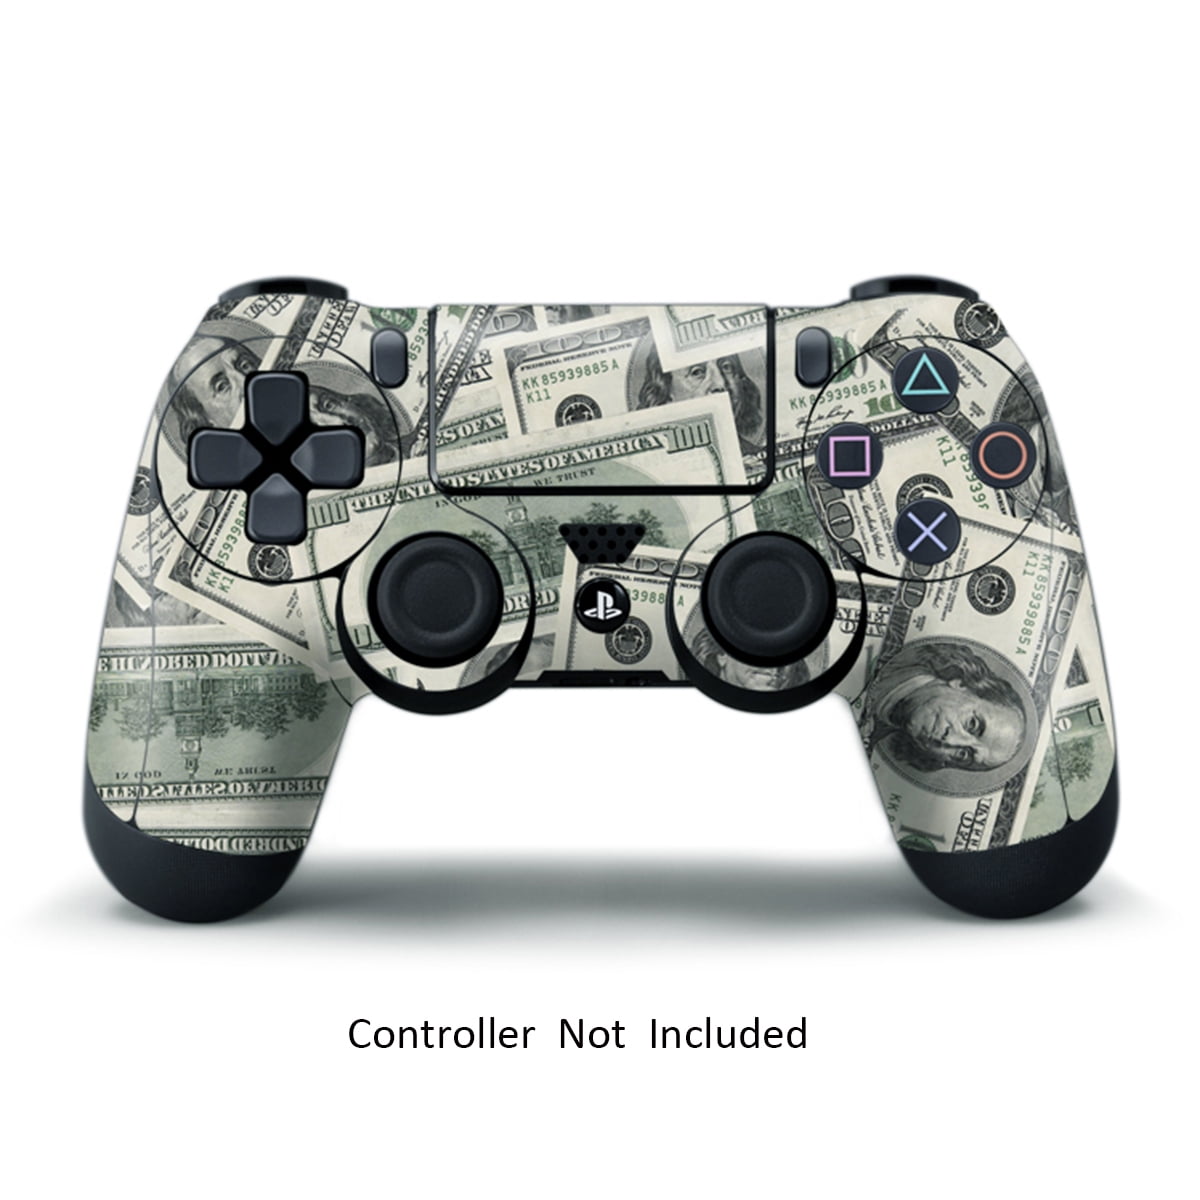 Skin Stickers for Playstation 4 Controller - Vinyl Leather Texture Sticker for DualShock 4 Wireless Sixaxis Controllers - Protectors Controller Decal - Big Dark - Walmart.com